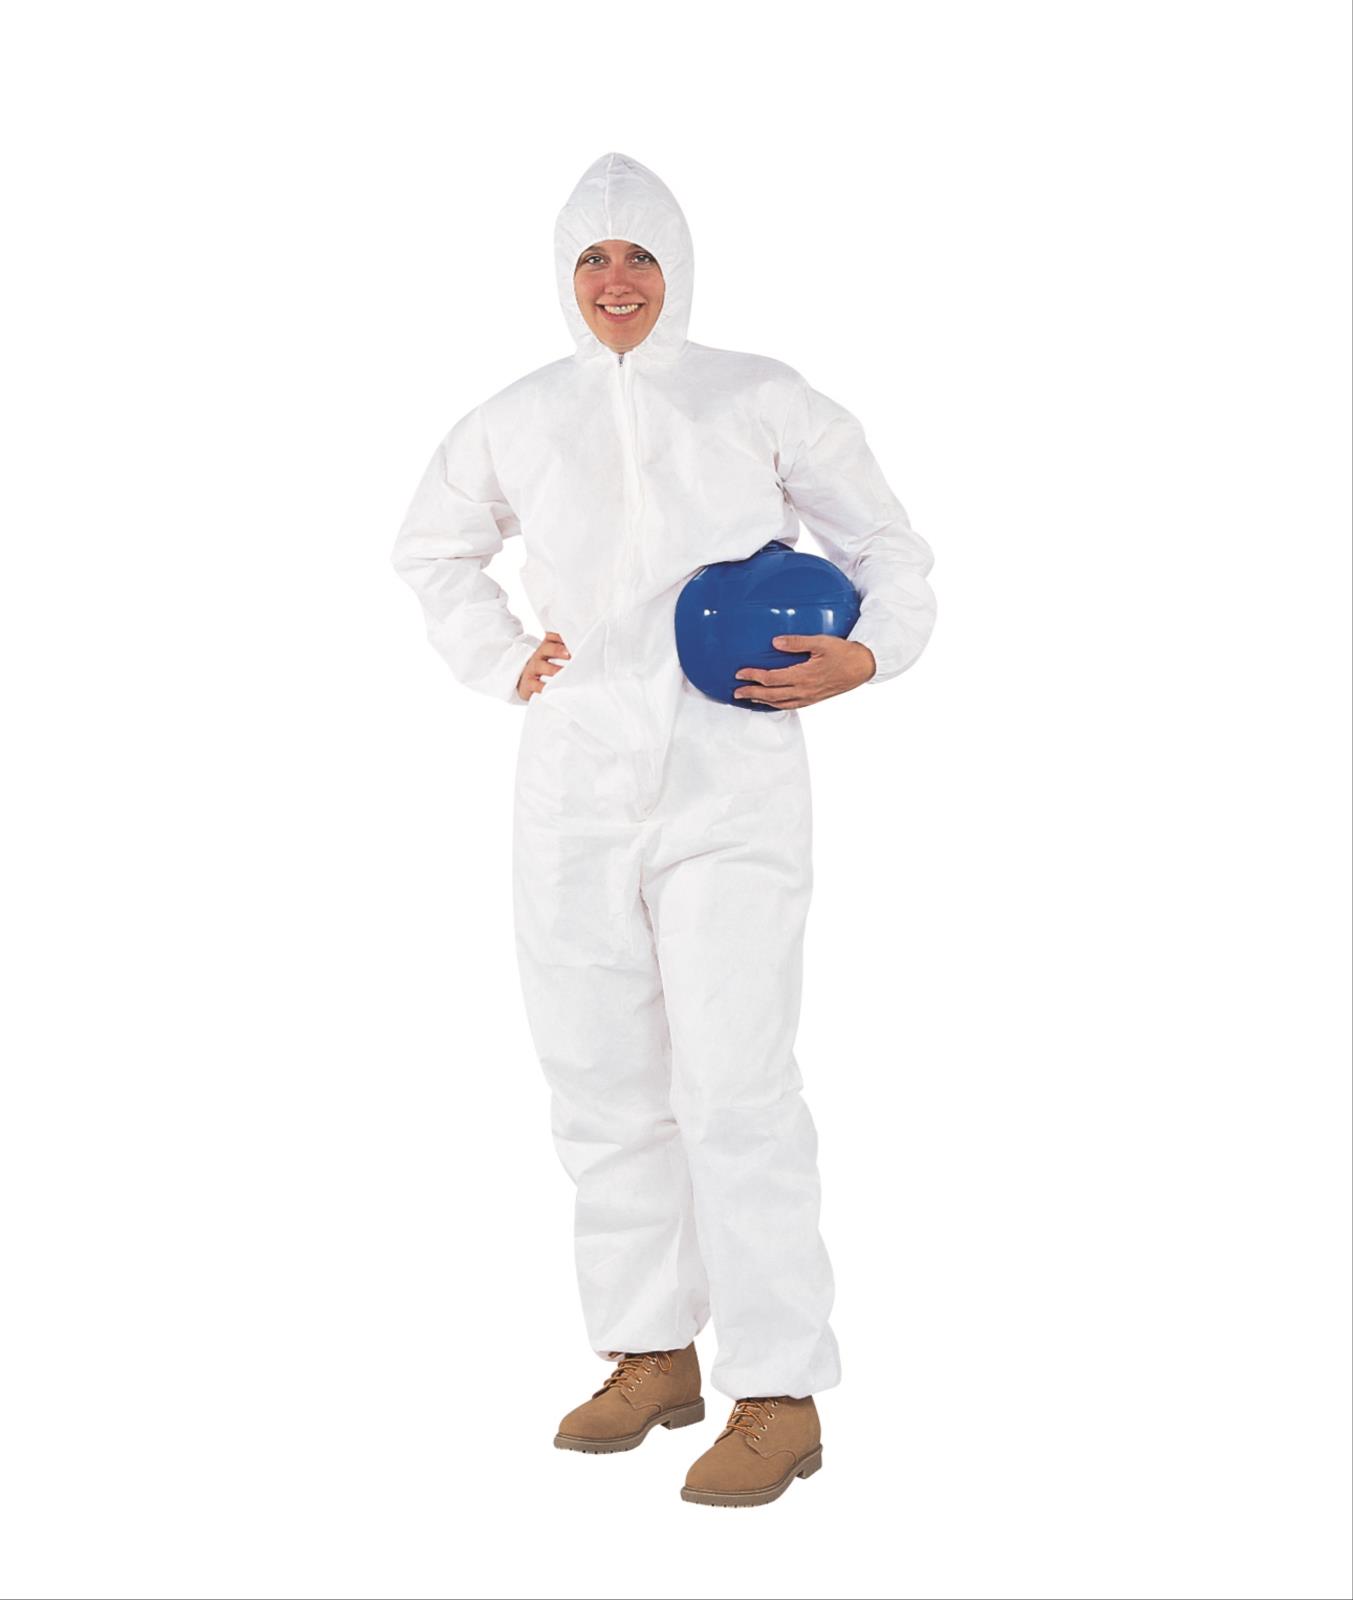 KLEENGUARD® A20 Breathable Particle Protection Coveralls